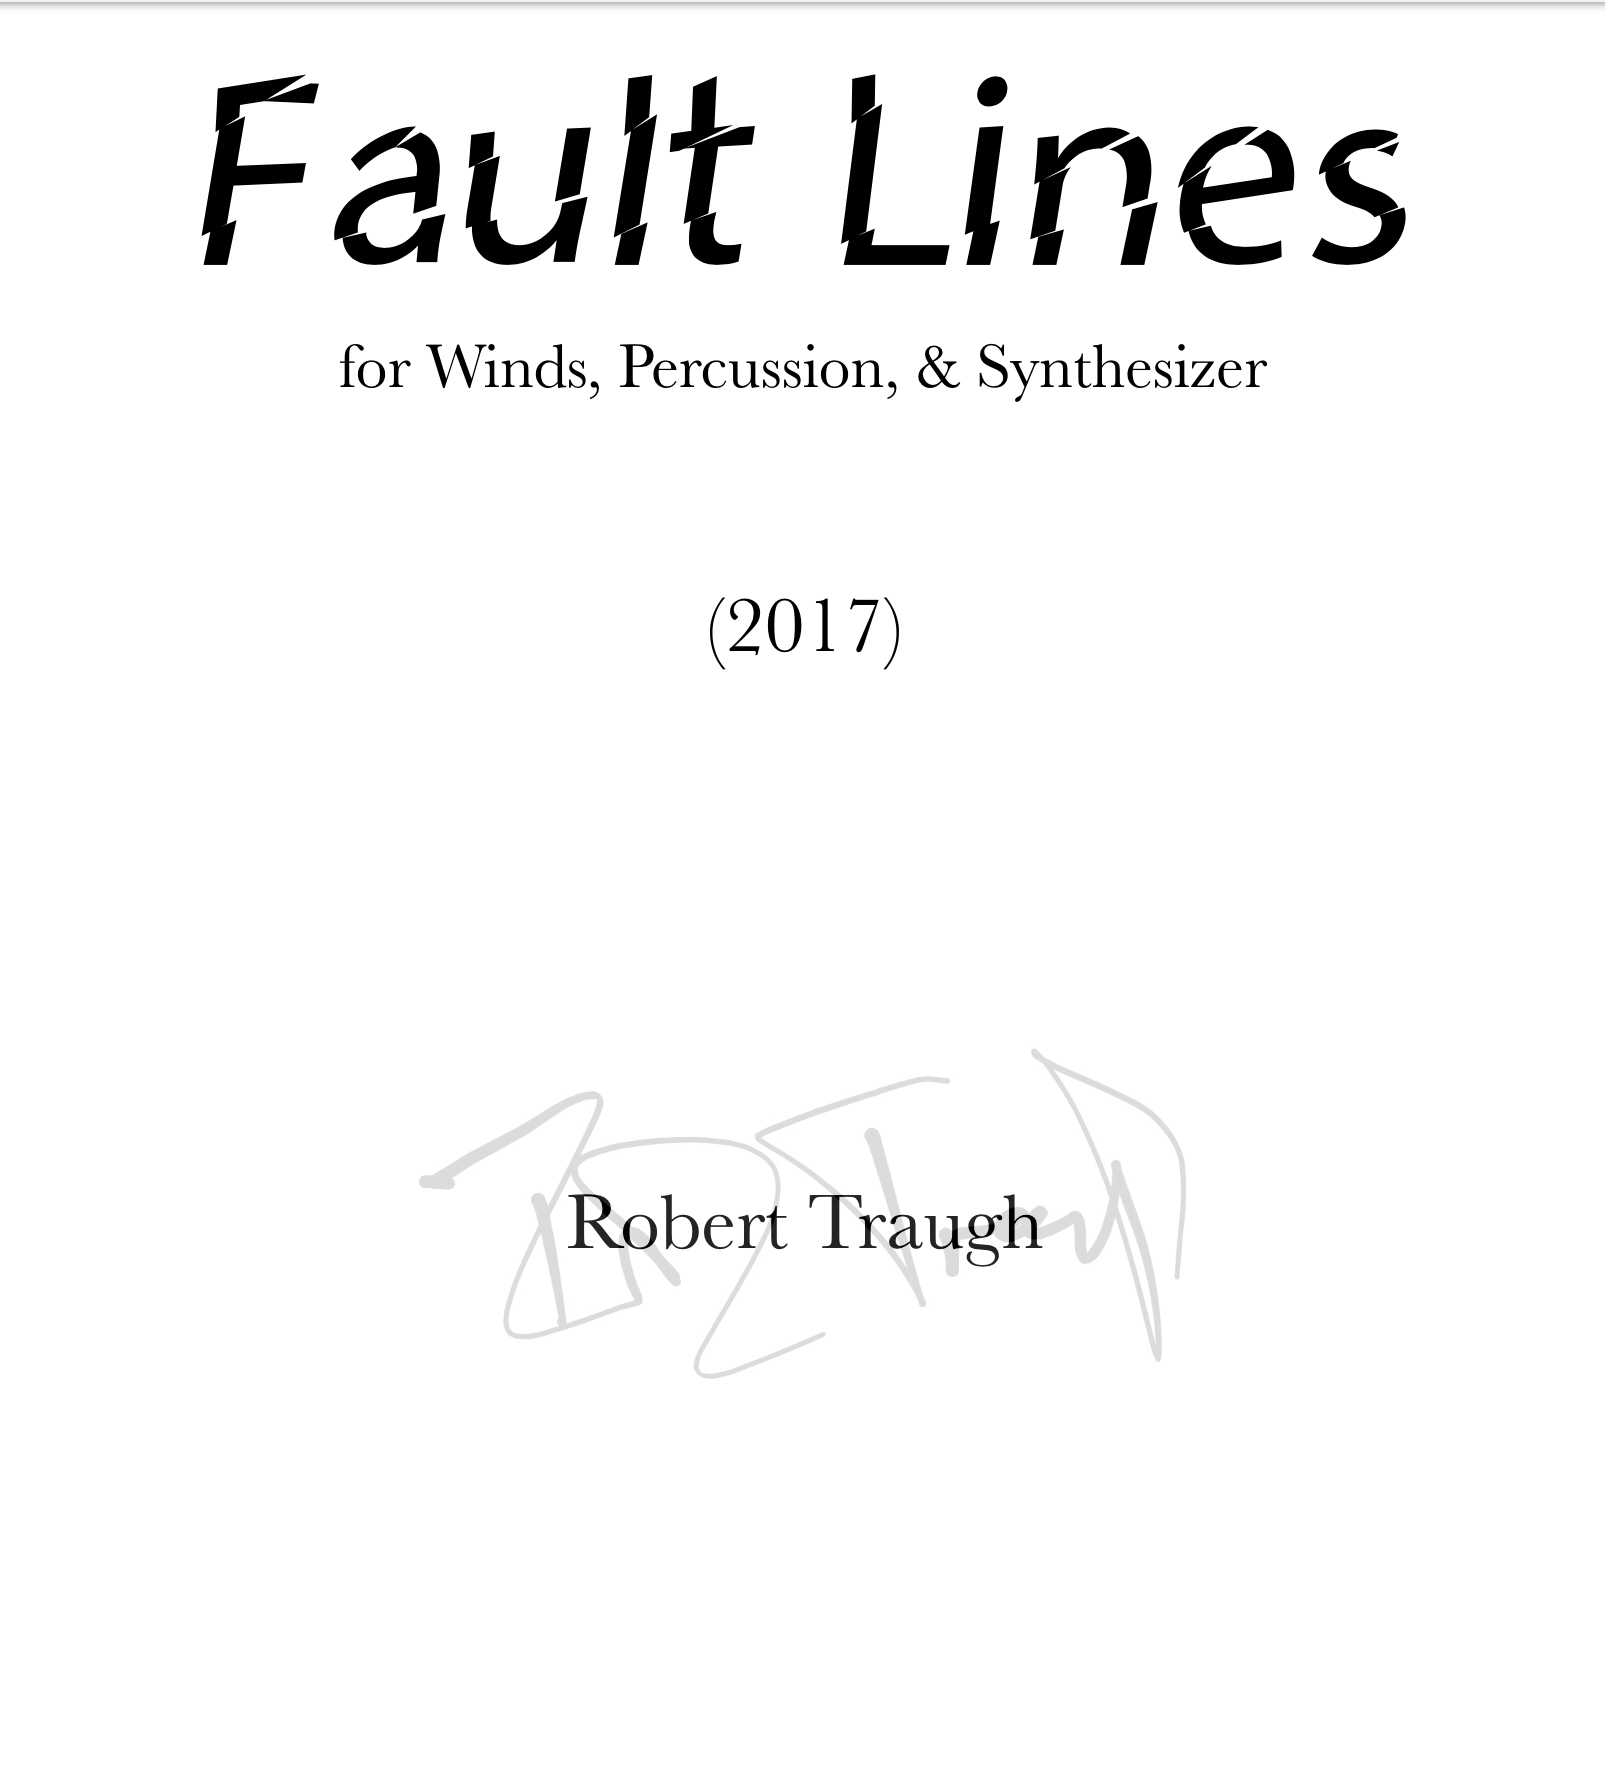 Fault Lines by Rob Traugh